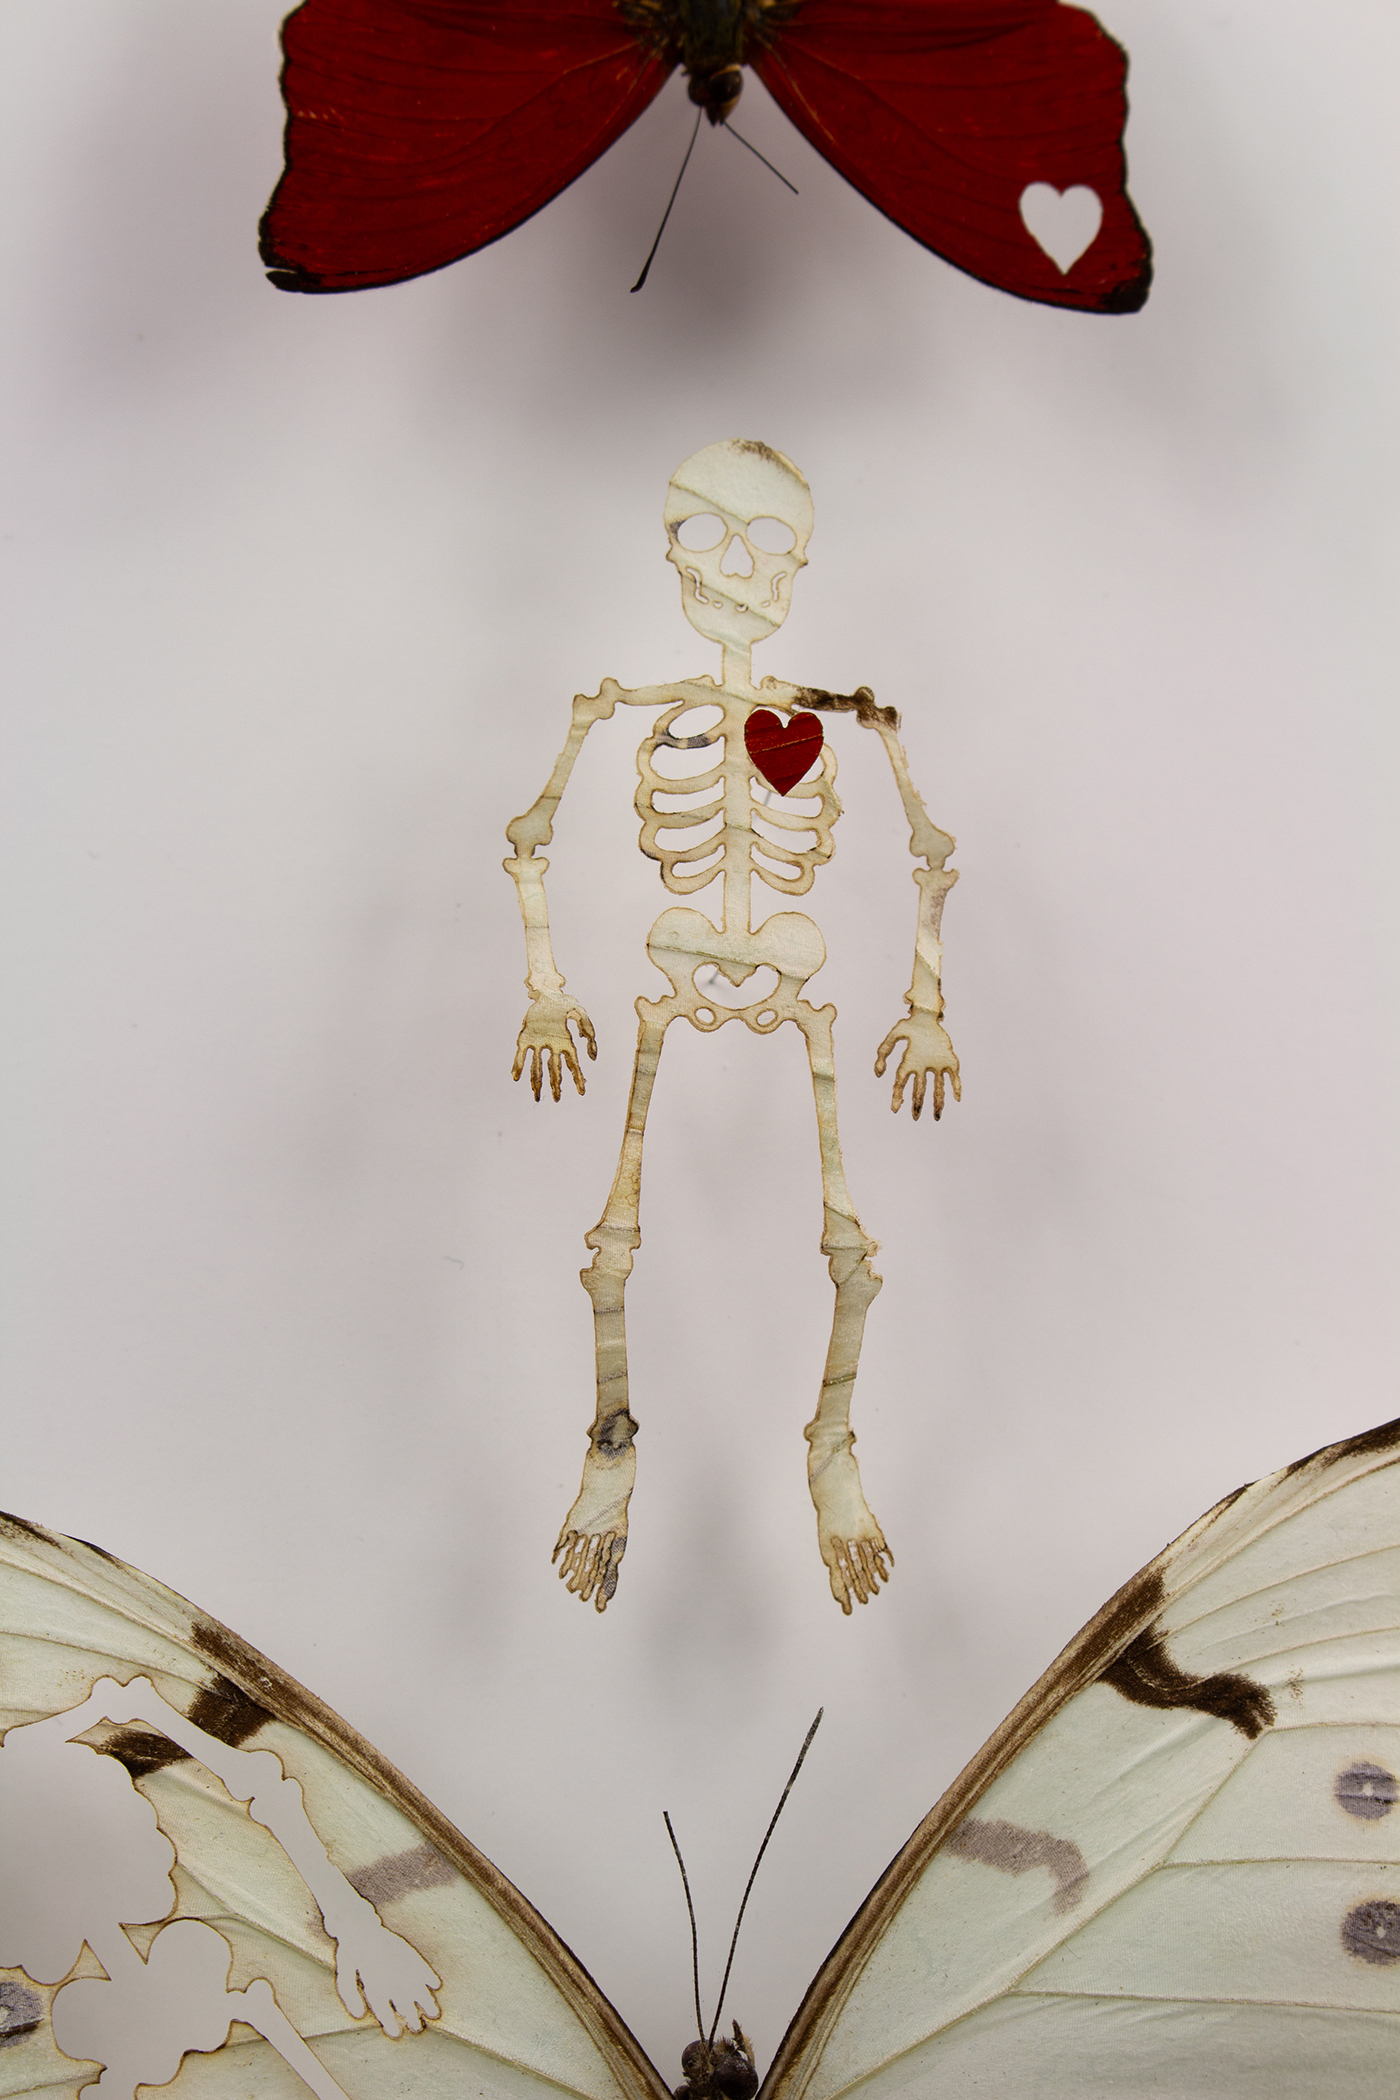 Sphenoid is a framed artwork by Fiona Parkinson, image shows skeleton cut from butterfly with red heart